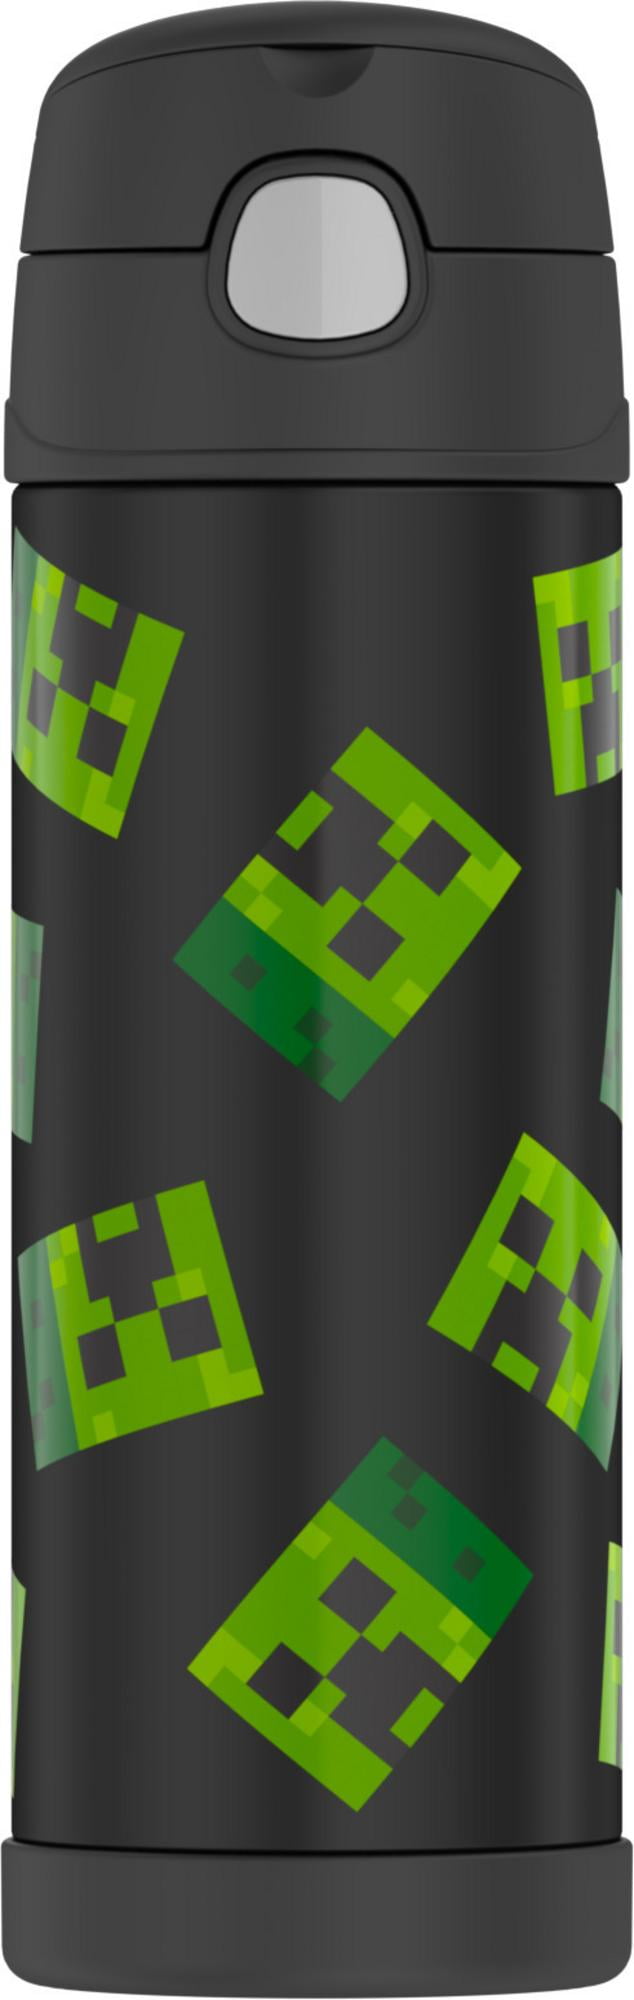 Thermos Funtainer Vacuum Insulated Stainless Steel Water Bottle, Minecraft, 16 fl oz, Size: 16 oz